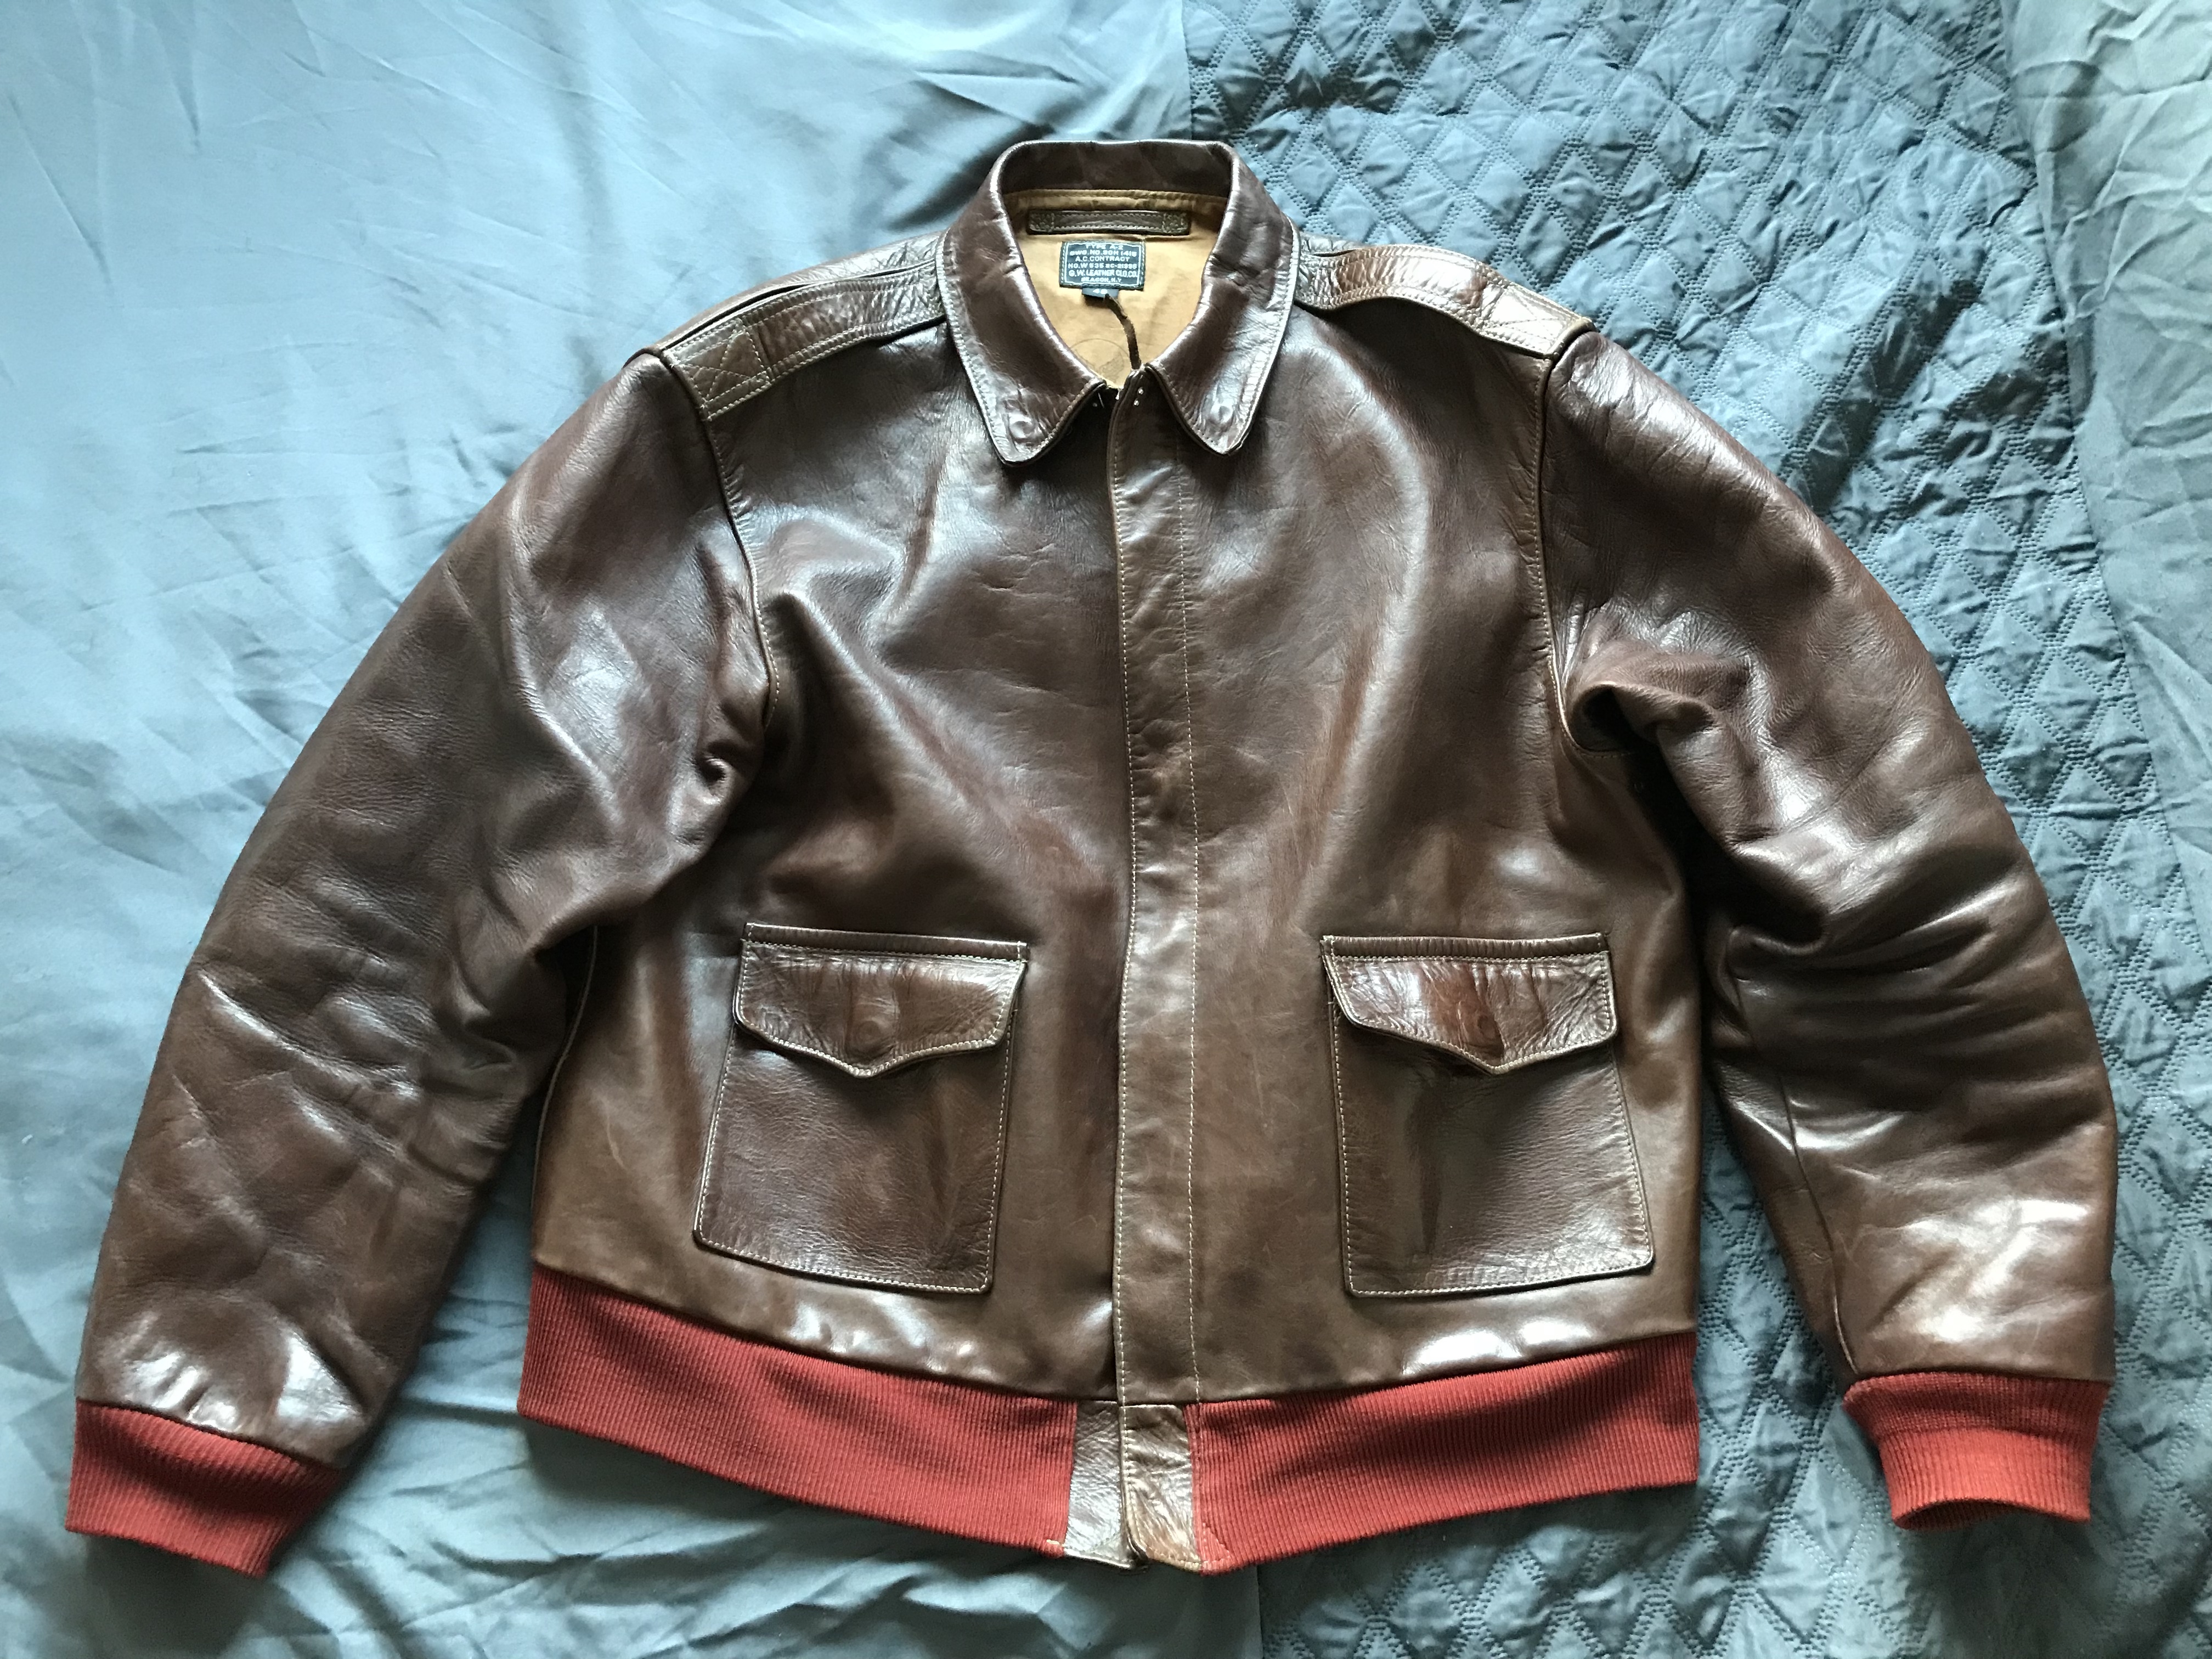 New (to me) GW Acme Aero 48” chest | Page 3 | Vintage Leather Jackets Forum